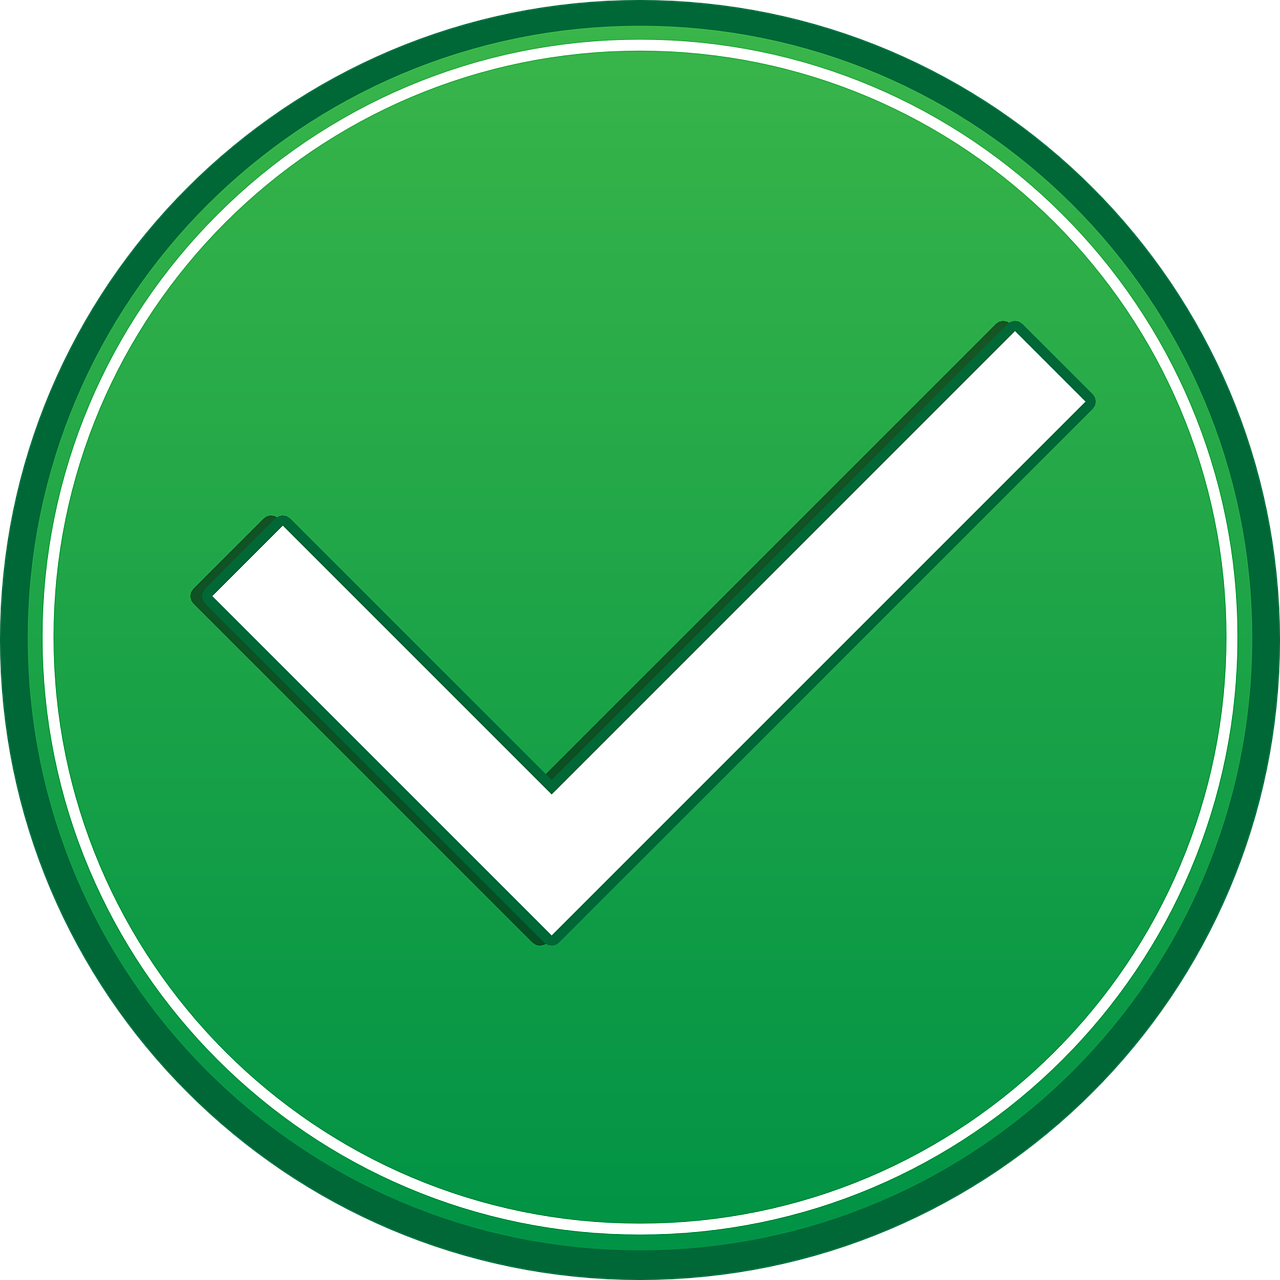 white check mark inside green circle to symbolize benefits of opening a high risk merchant account